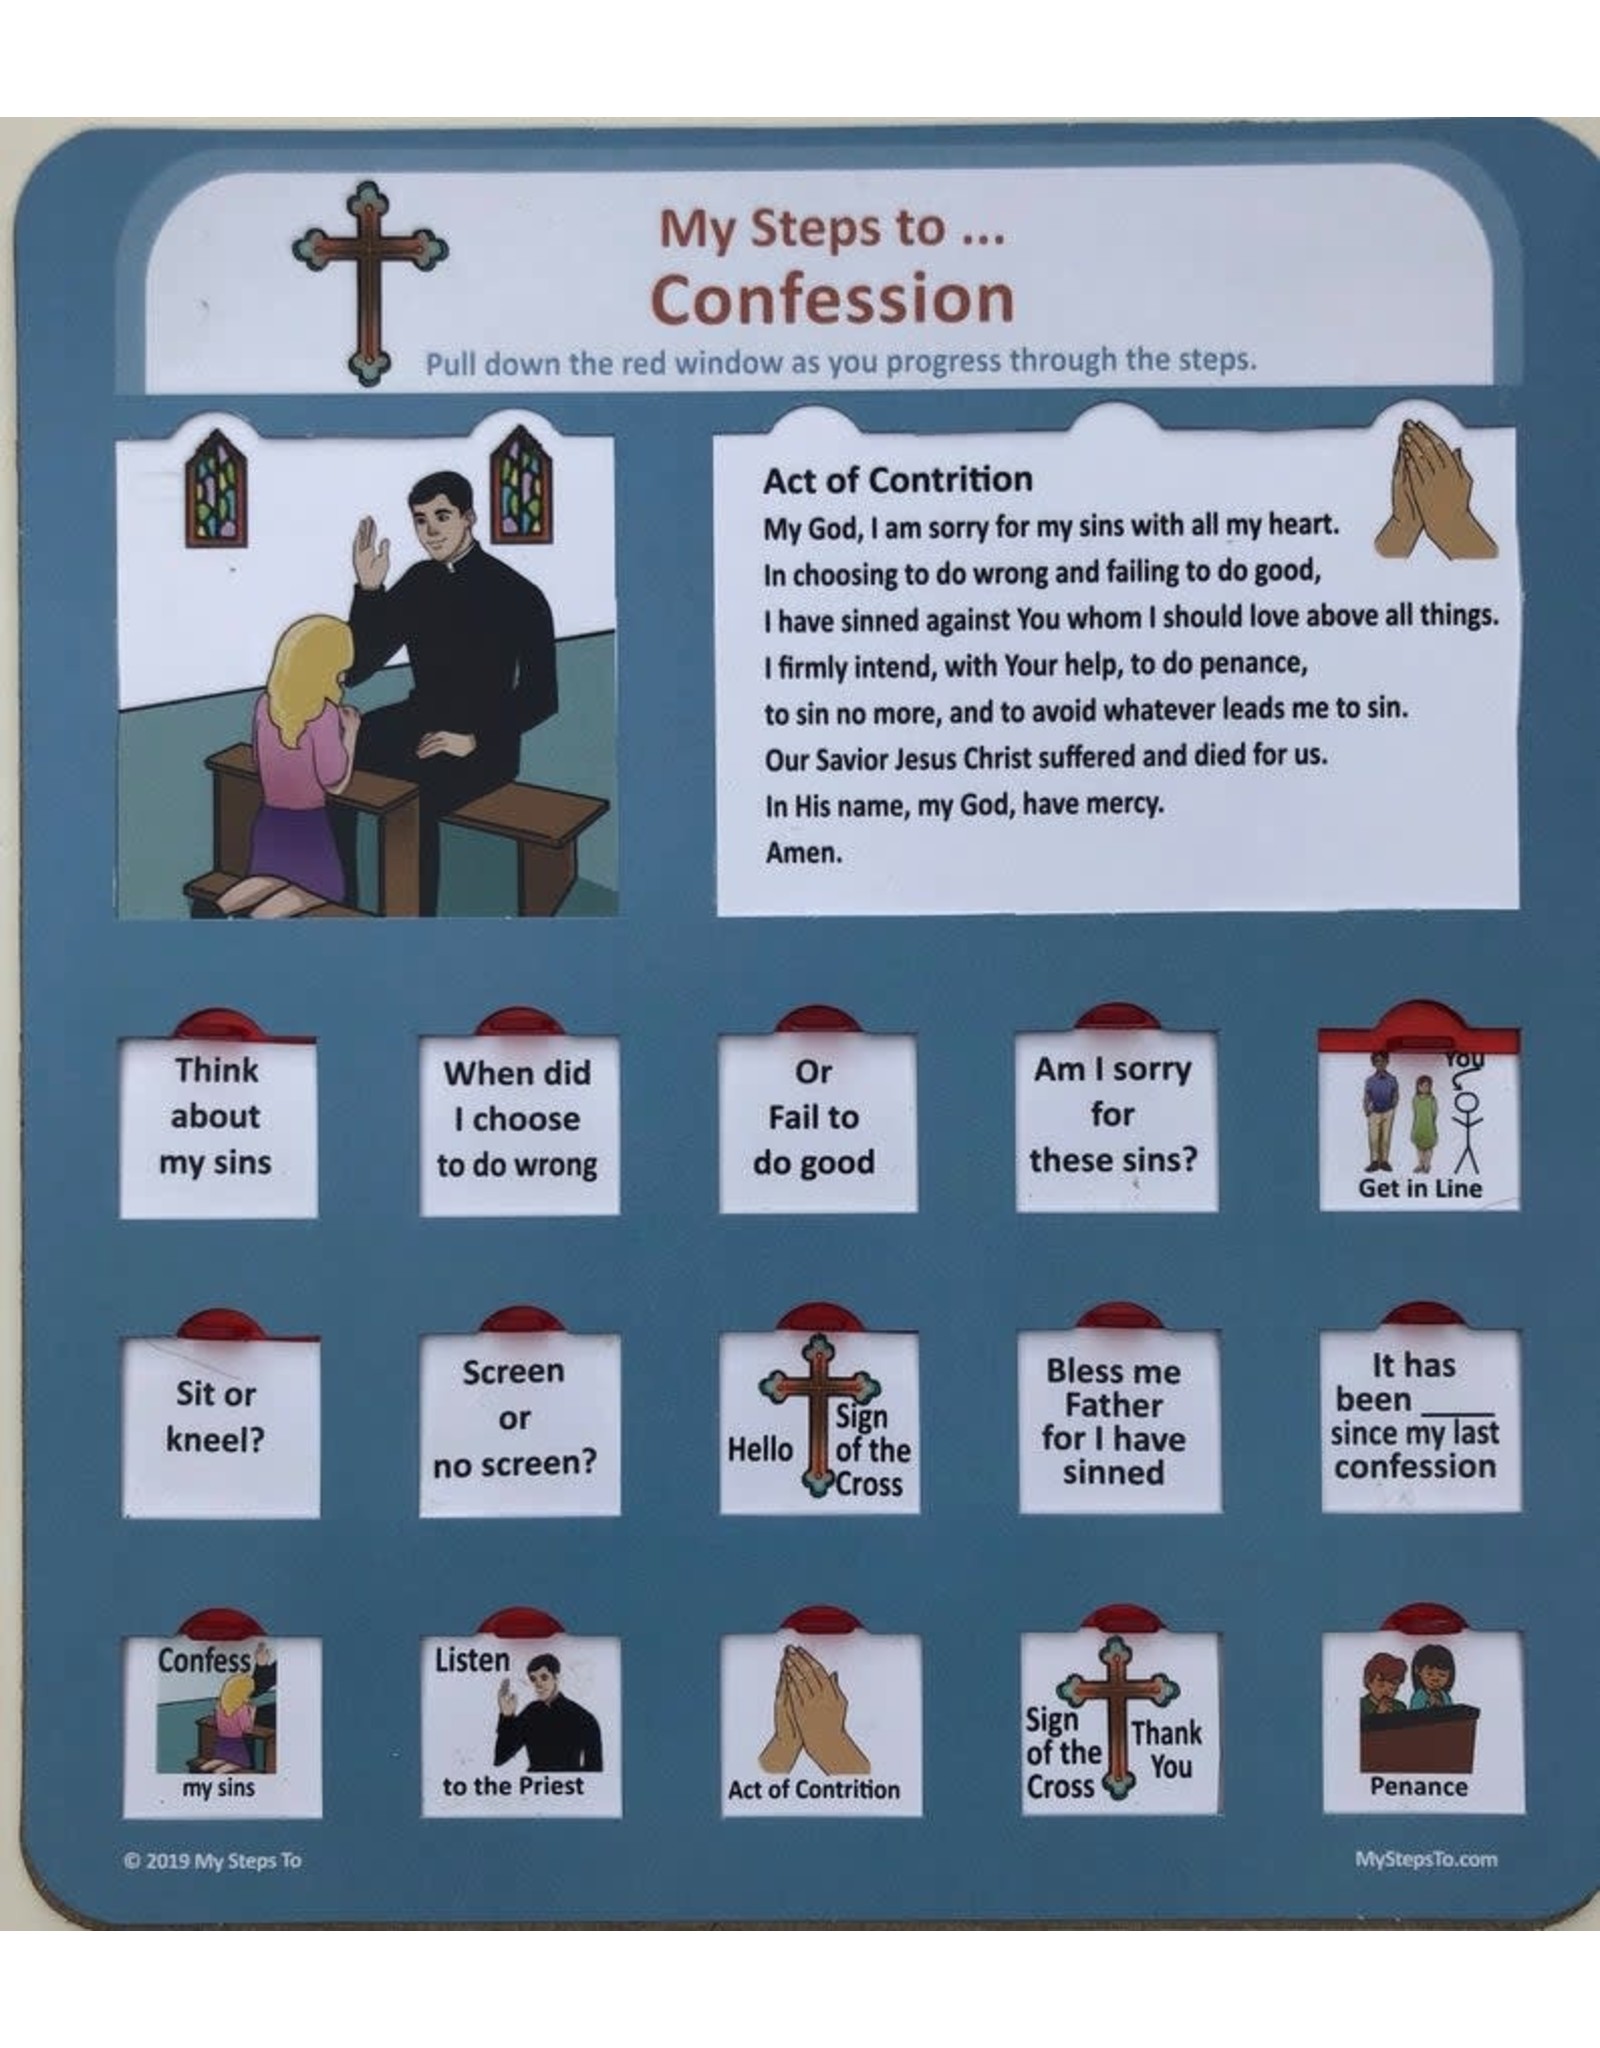 My Steps to Confession (with pull-down sliders)